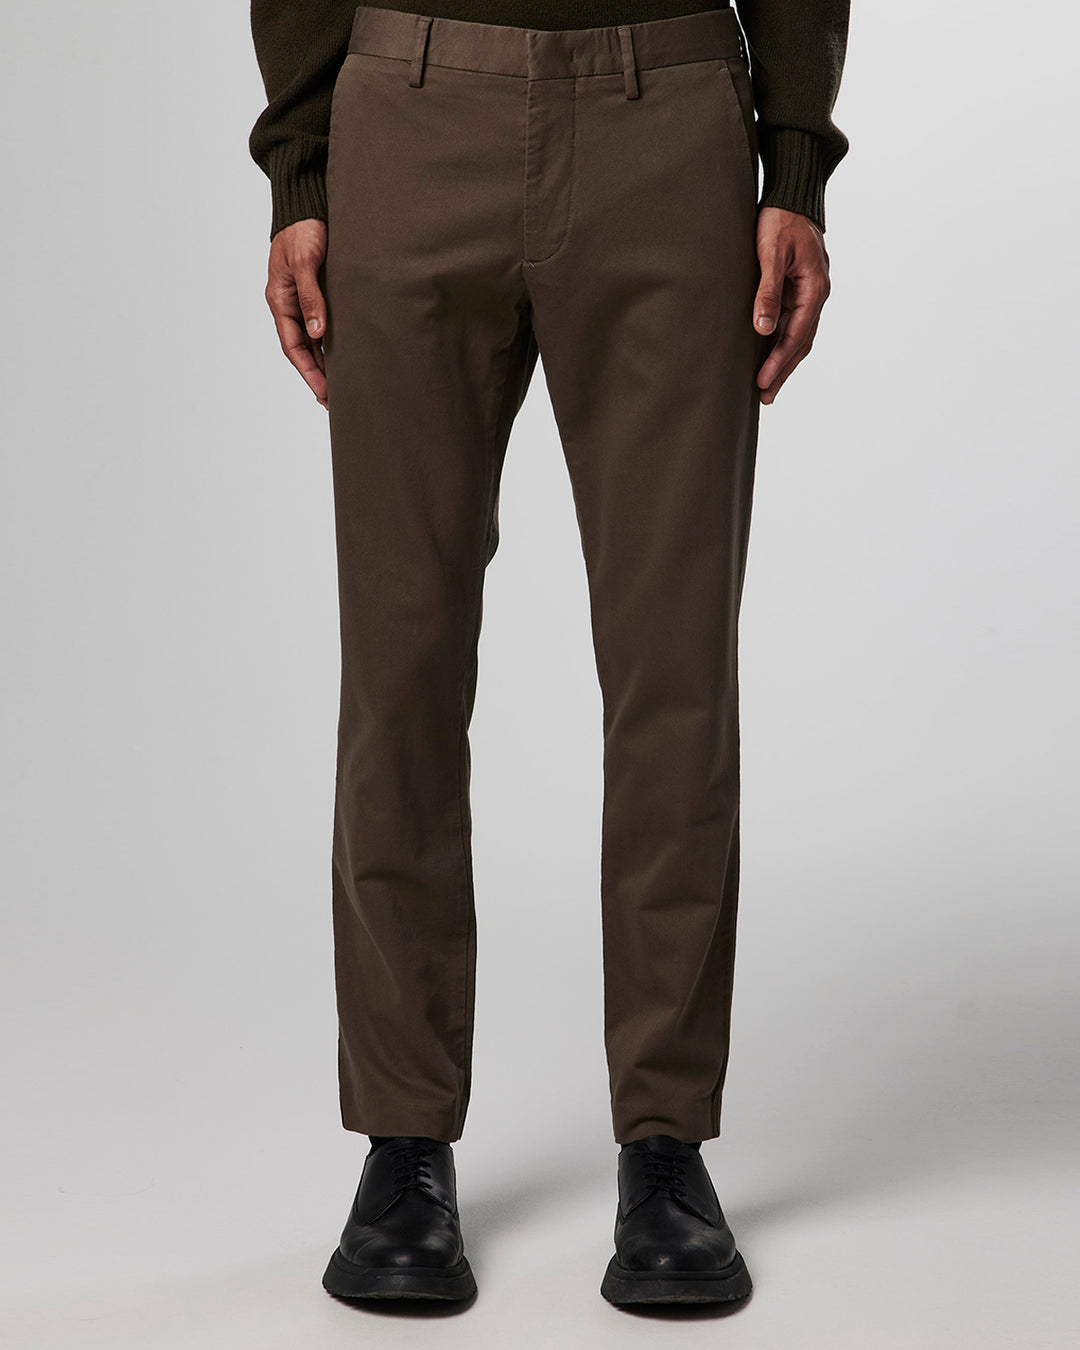 NN07 - Theo 1420 Pant in Clay | Buster McGee